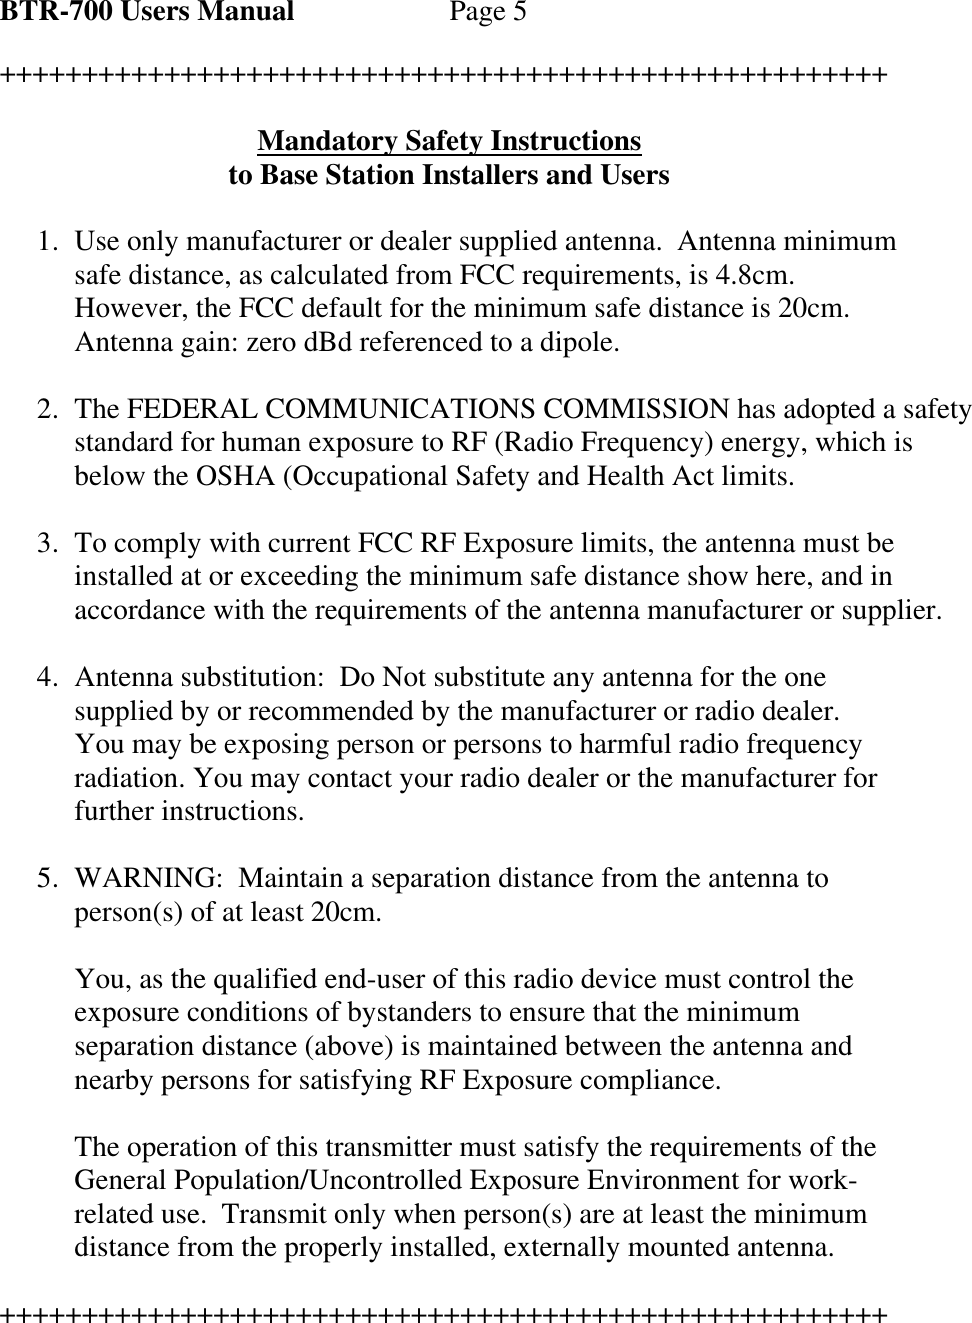 BTR-700 Users Manual   Page 5  ++++++++++++++++++++++++++++++++++++++++++++++++++++++  Mandatory Safety Instructions to Base Station Installers and Users  1. Use only manufacturer or dealer supplied antenna.  Antenna minimum safe distance, as calculated from FCC requirements, is 4.8cm.  However, the FCC default for the minimum safe distance is 20cm.  Antenna gain: zero dBd referenced to a dipole.  2. The FEDERAL COMMUNICATIONS COMMISSION has adopted a safety standard for human exposure to RF (Radio Frequency) energy, which is below the OSHA (Occupational Safety and Health Act limits.  3. To comply with current FCC RF Exposure limits, the antenna must be installed at or exceeding the minimum safe distance show here, and in accordance with the requirements of the antenna manufacturer or supplier.  4. Antenna substitution:  Do Not substitute any antenna for the one supplied by or recommended by the manufacturer or radio dealer.  You may be exposing person or persons to harmful radio frequency radiation. You may contact your radio dealer or the manufacturer for further instructions.  5. WARNING:  Maintain a separation distance from the antenna to person(s) of at least 20cm.  You, as the qualified end-user of this radio device must control the exposure conditions of bystanders to ensure that the minimum separation distance (above) is maintained between the antenna and nearby persons for satisfying RF Exposure compliance.  The operation of this transmitter must satisfy the requirements of the General Population/Uncontrolled Exposure Environment for work-related use.  Transmit only when person(s) are at least the minimum distance from the properly installed, externally mounted antenna.  ++++++++++++++++++++++++++++++++++++++++++++++++++++++ 